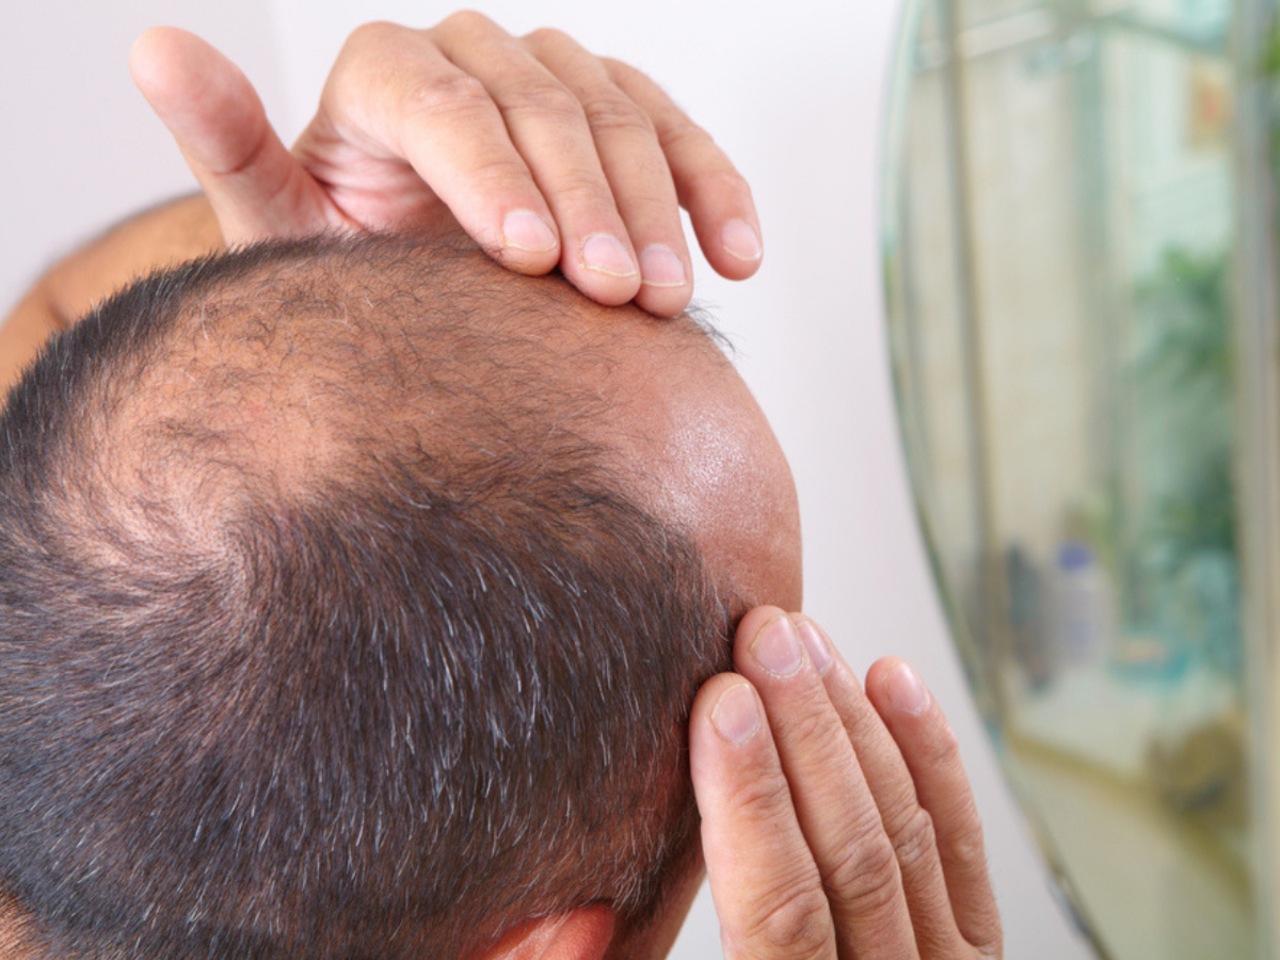 Cure for baldness might be hiding in your hairy moles study